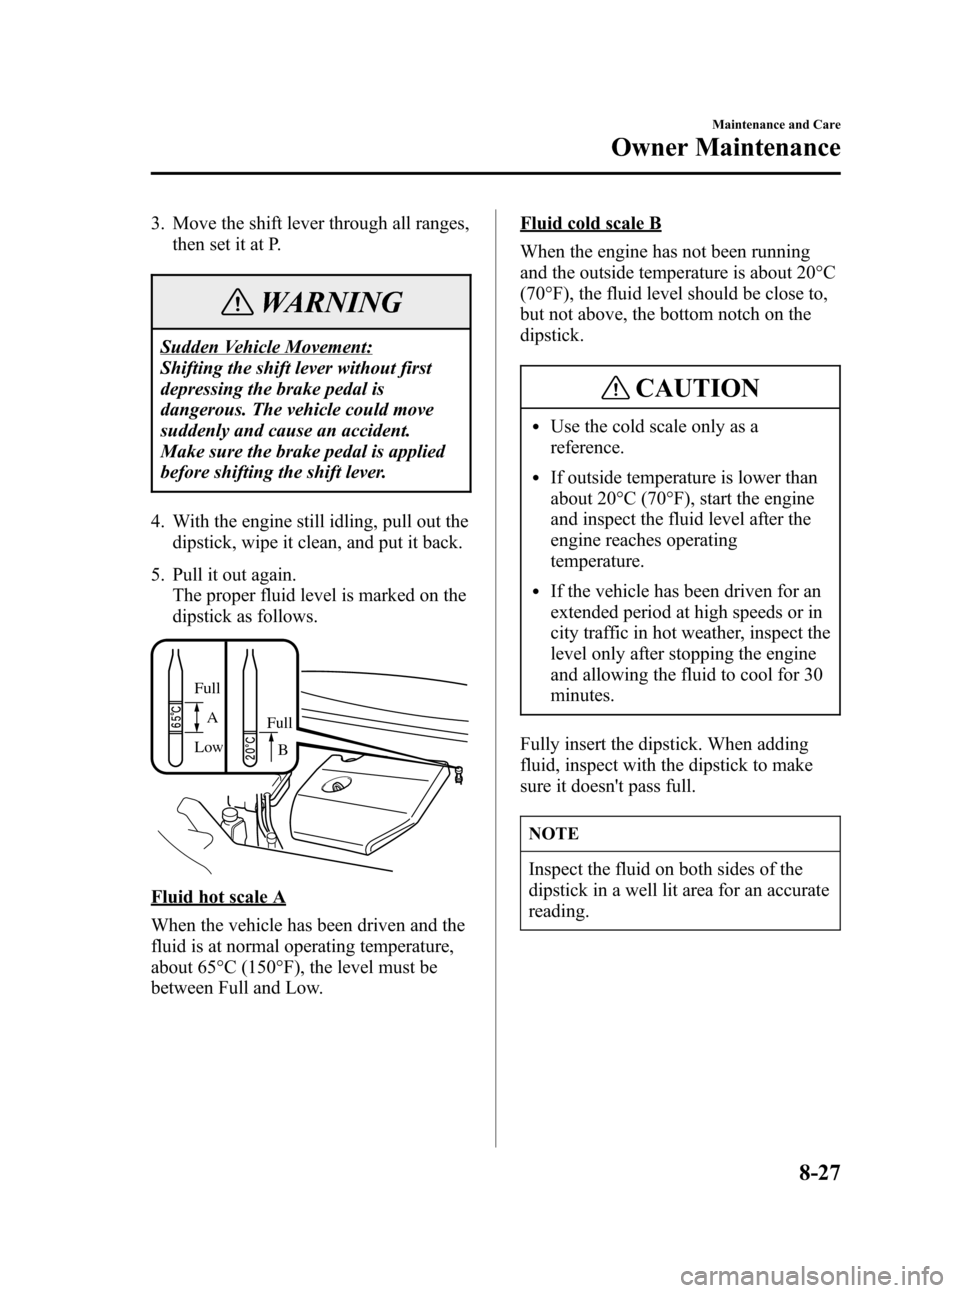 MAZDA MODEL 3 HATCHBACK 2007   (in English) Owners Guide Black plate (301,1)
3. Move the shift lever through all ranges,
then set it at P.
WARNING
Sudden Vehicle Movement:
Shifting the shift lever without first
depressing the brake pedal is
dangerous. The v